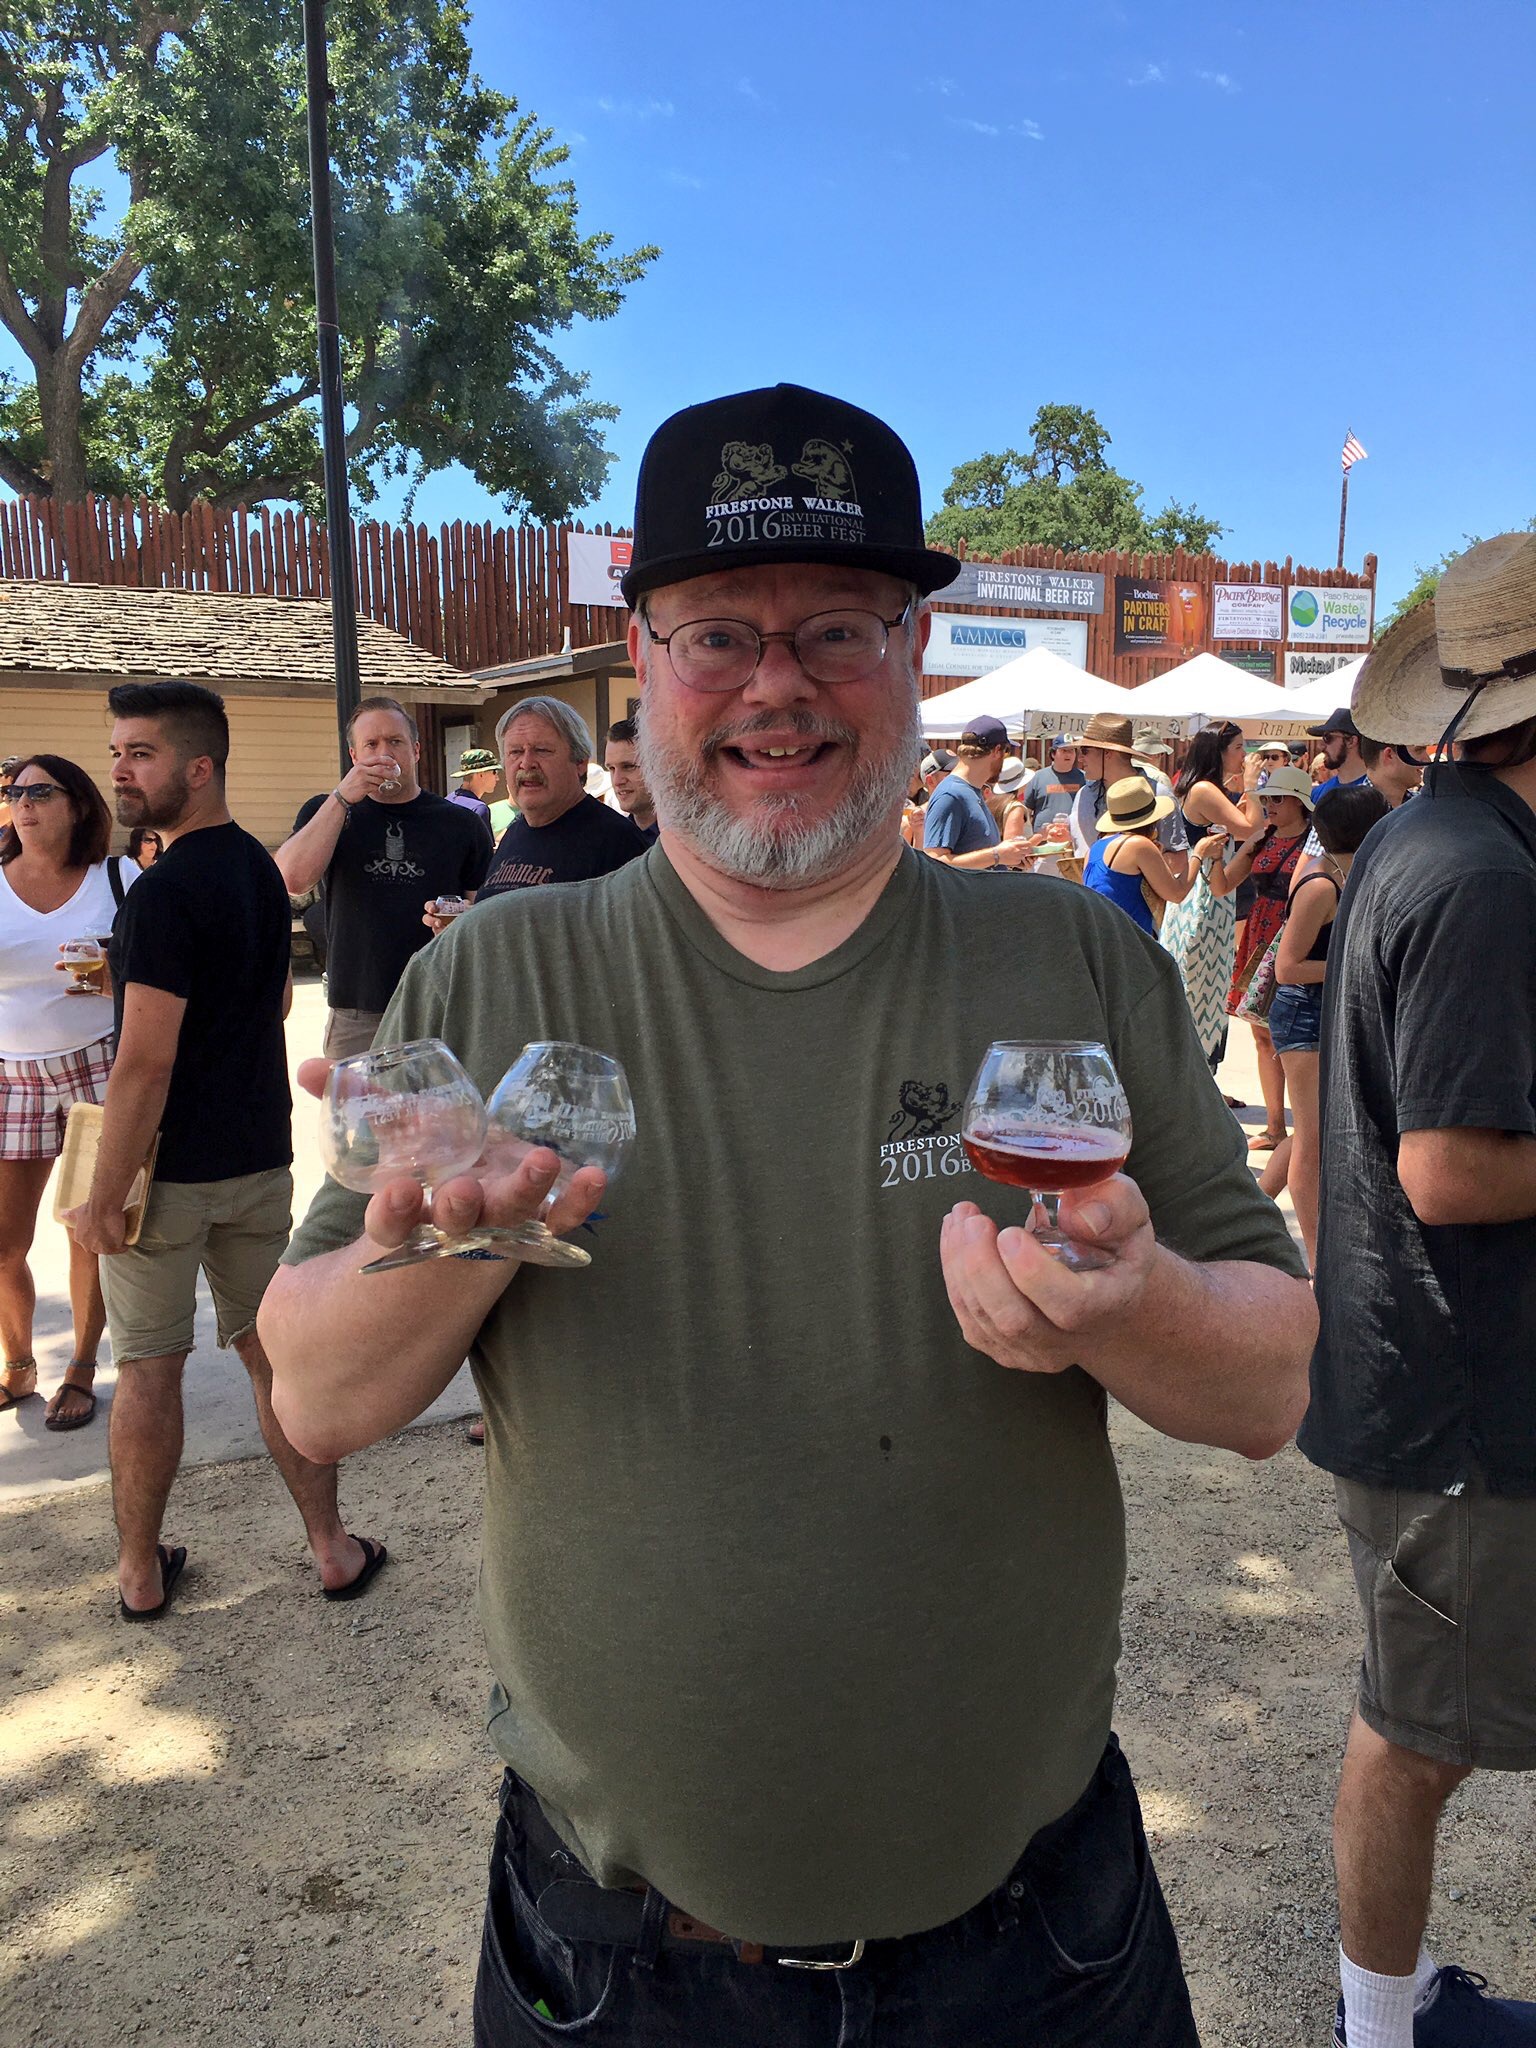 This guy must be thirsty! Of course Don Scheidt was in Paso Robles all the way from Portland, Oregon to celebrate the 2016 Firestone Walker Invitational Beer Fest.